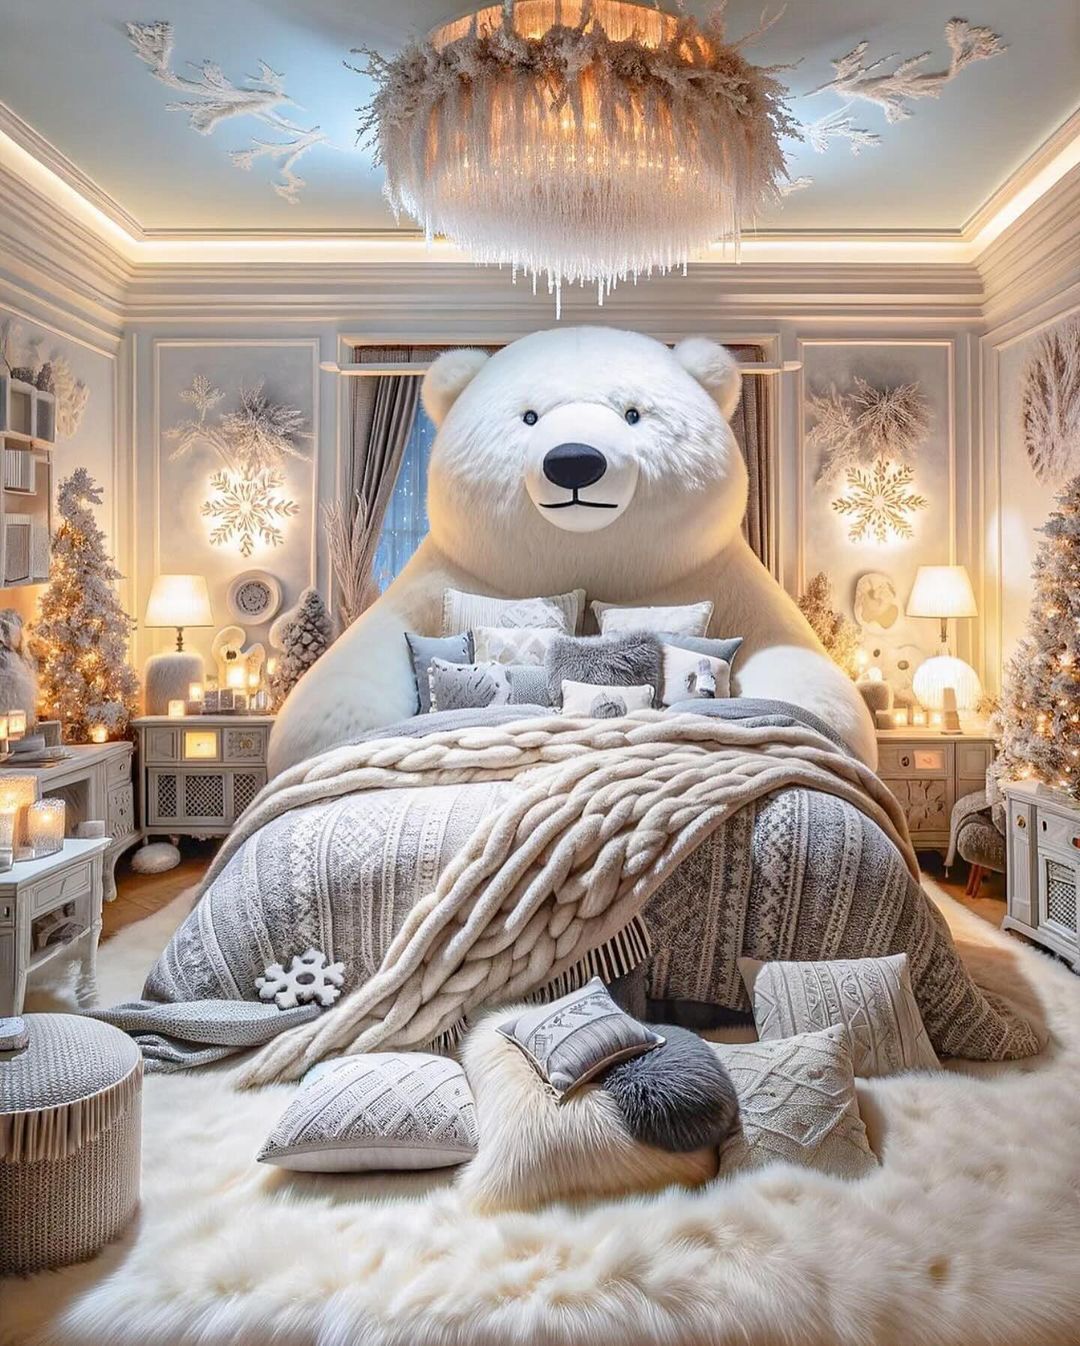 Teddy Bear Shaped Bed: Cuddly Comfort and Sweet Dreams in Every Curve